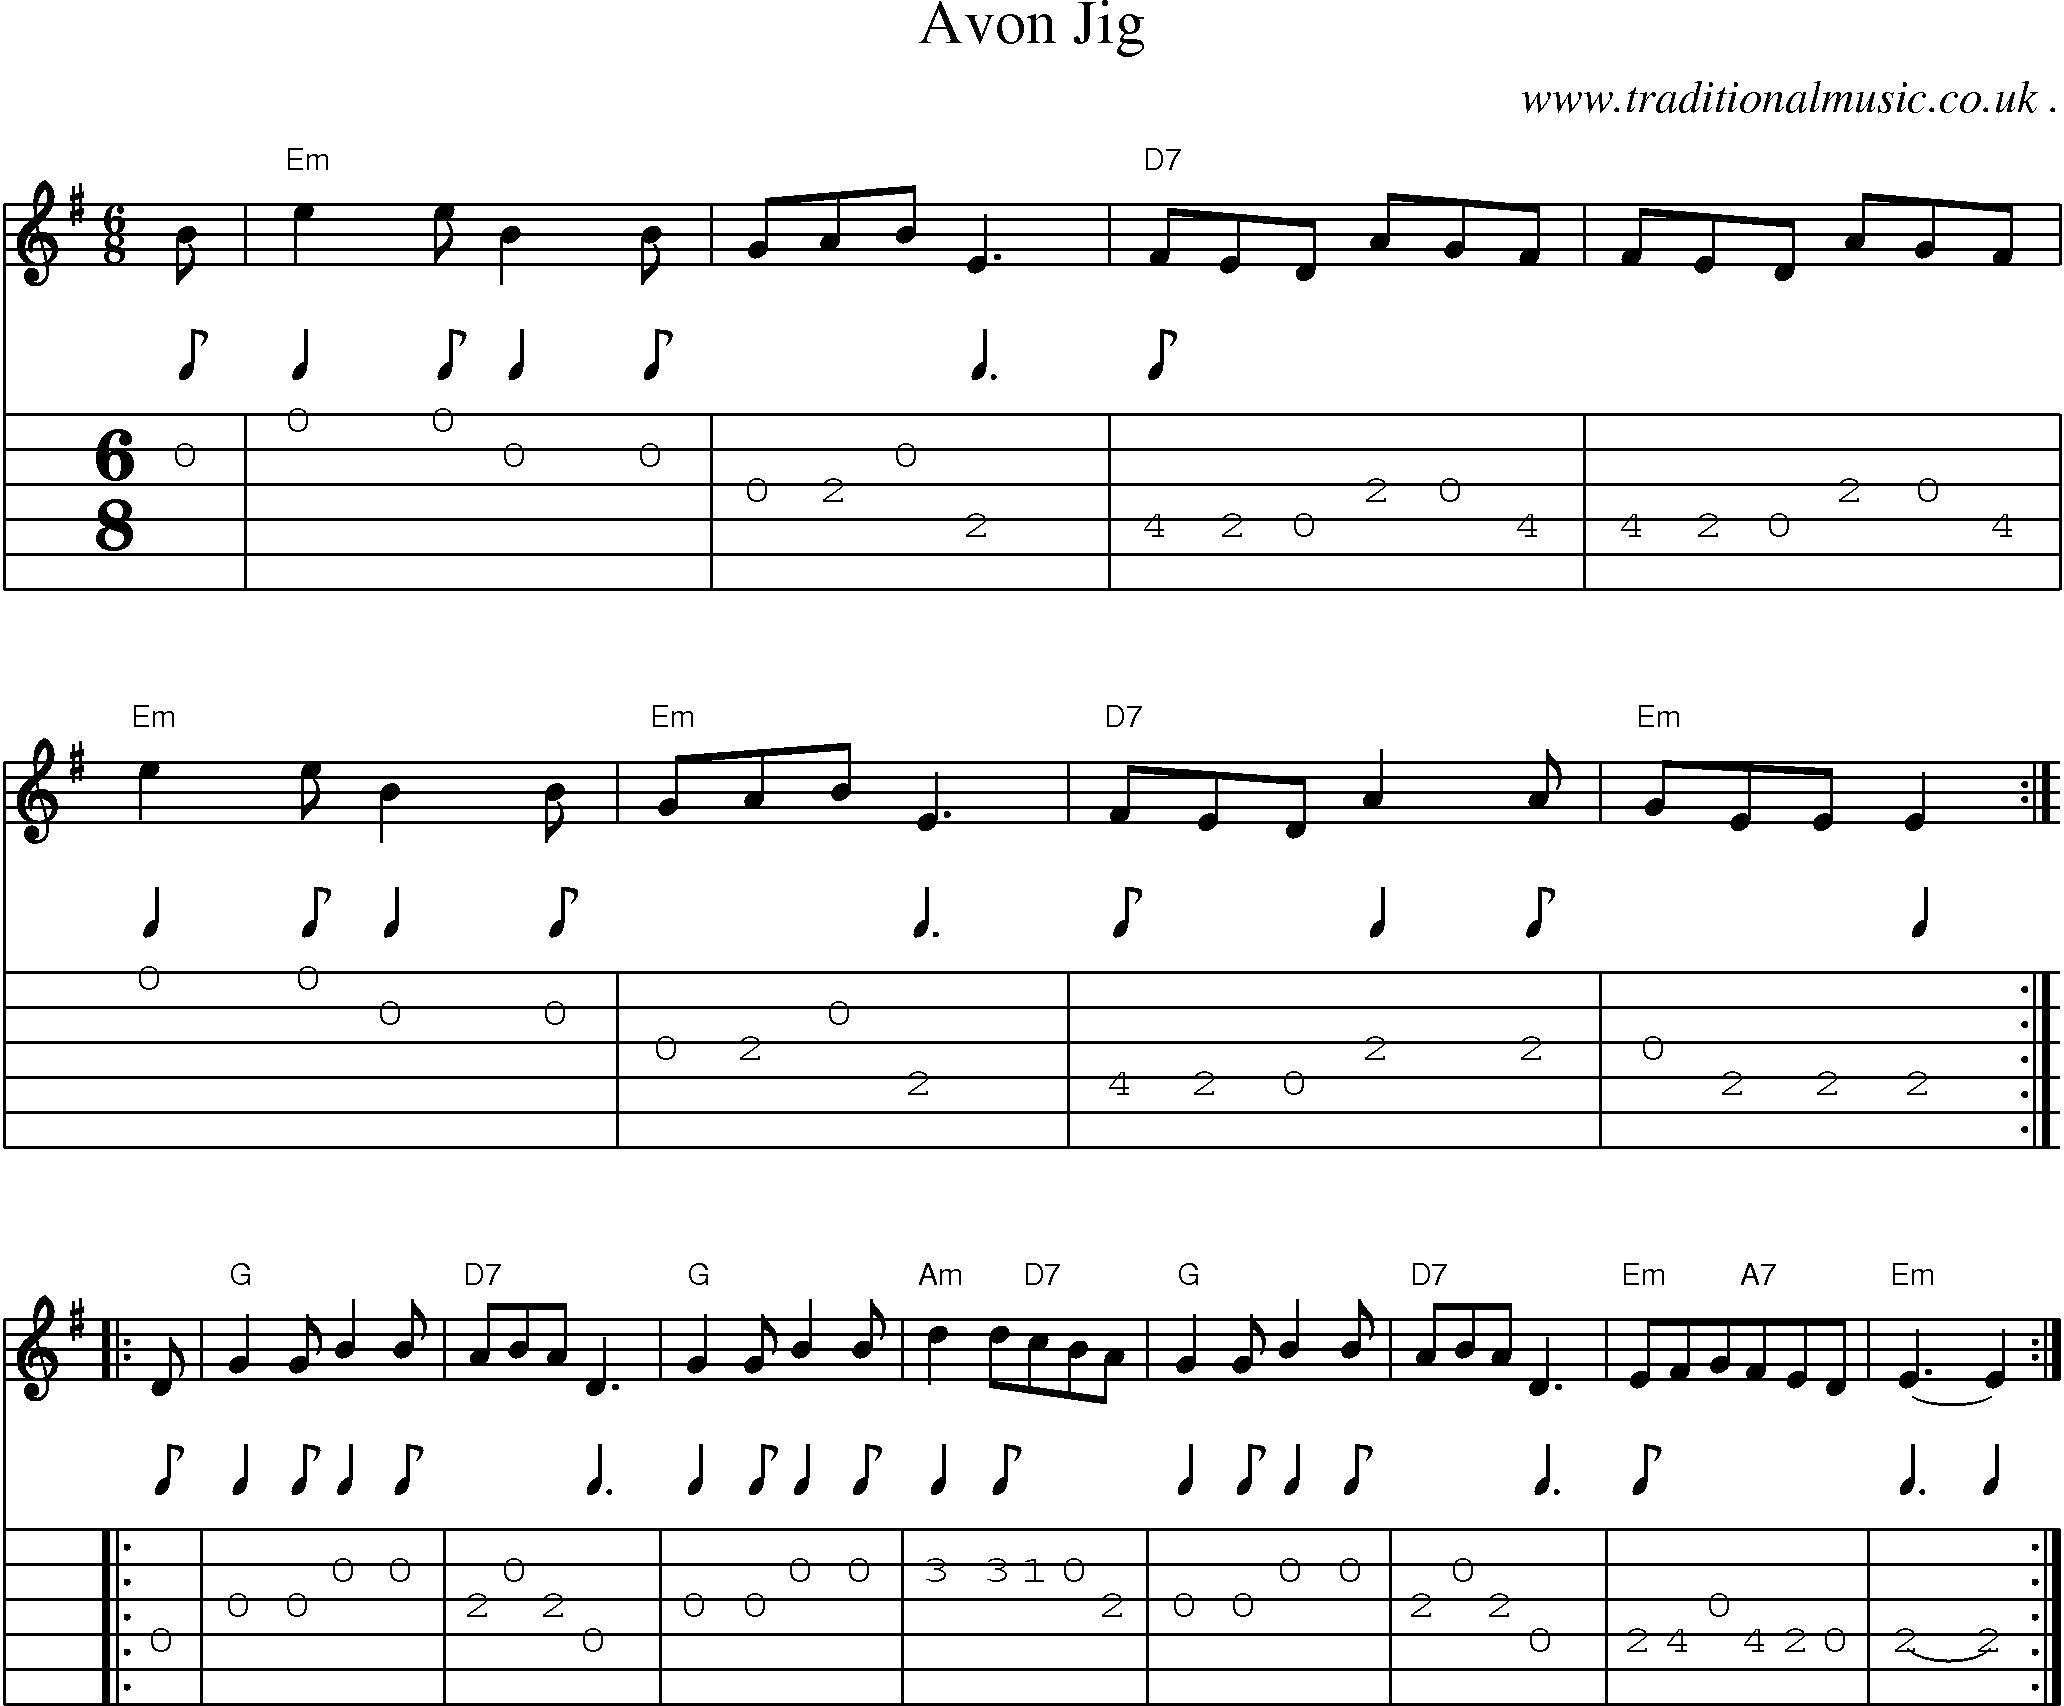 Sheet-Music and Guitar Tabs for Avon Jig